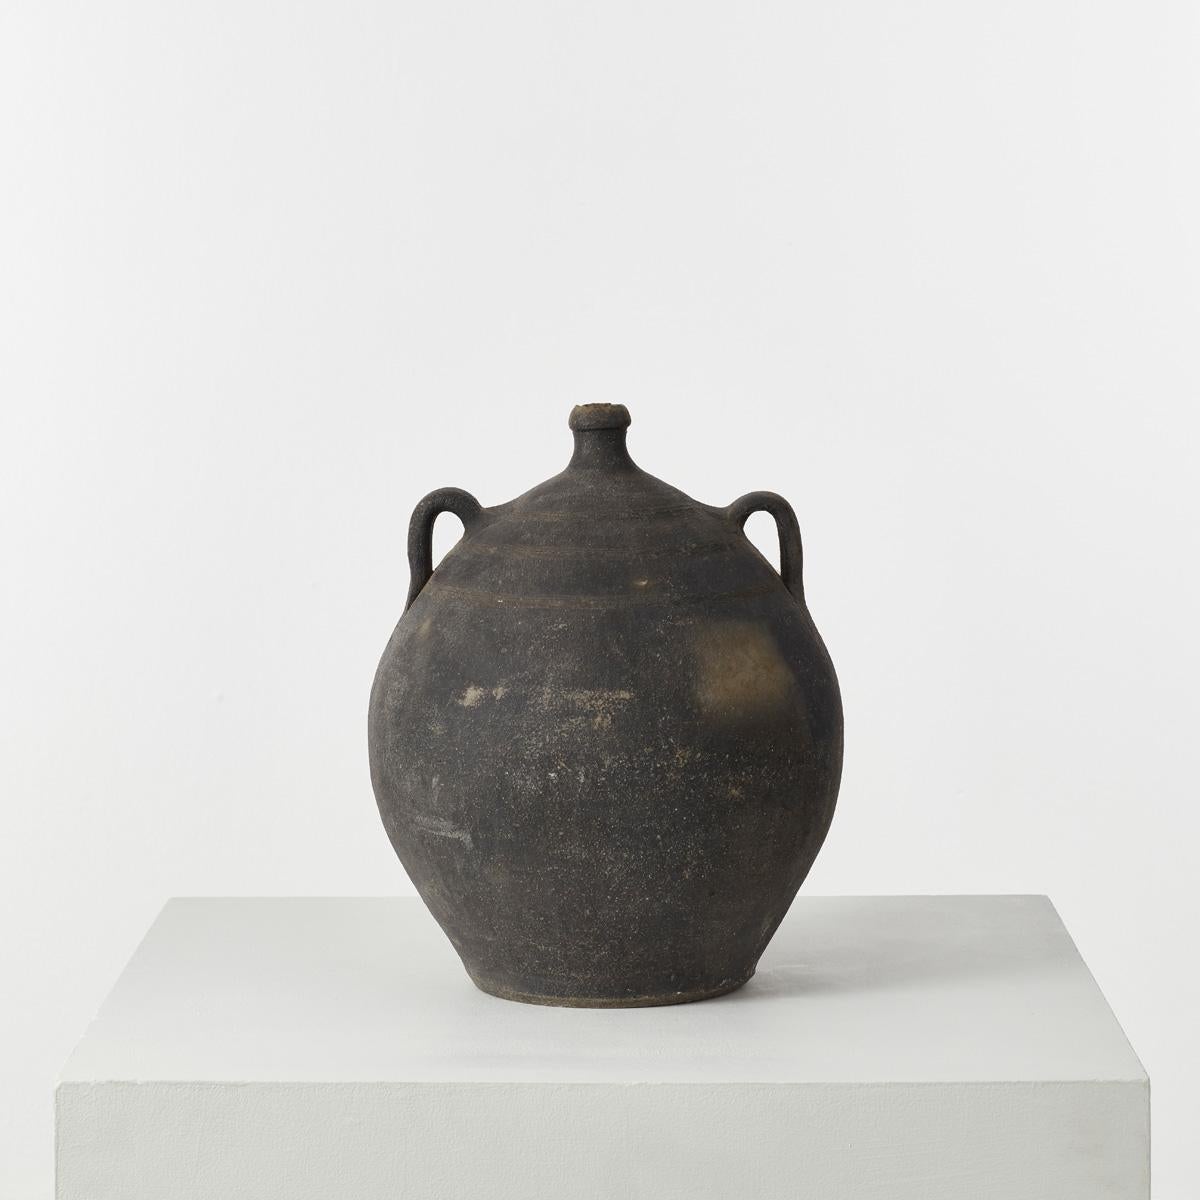 This black terracotta Cosi pot was crafted in the village of Quart in the Girona region of Catalonia in the 1800s. Its original function was to contain wine or olive oil. It possesses a beautiful, organic form and a dusky matte patina akin to